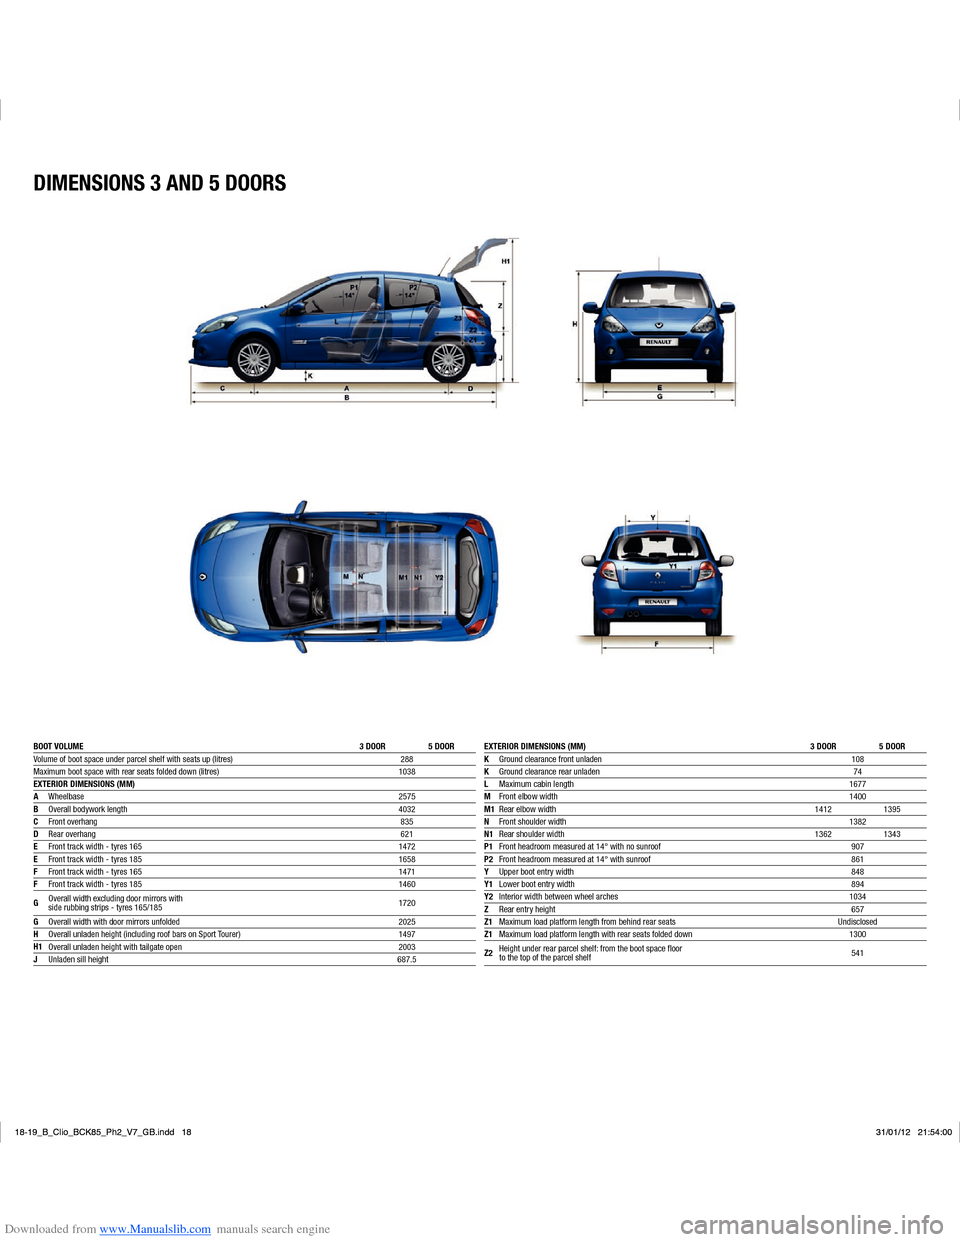 RENAULT CLIO 2012 X85 / 3.G User Manual Downloaded from www.Manualslib.com manuals search engine DIMENSIONS 3 AND 5 DOORS
BOOT VOLUME 3 DOOR 5 DOOR
Volume of boot space under parcel shelf with seats up (litres) 288
Maximum boot space with r